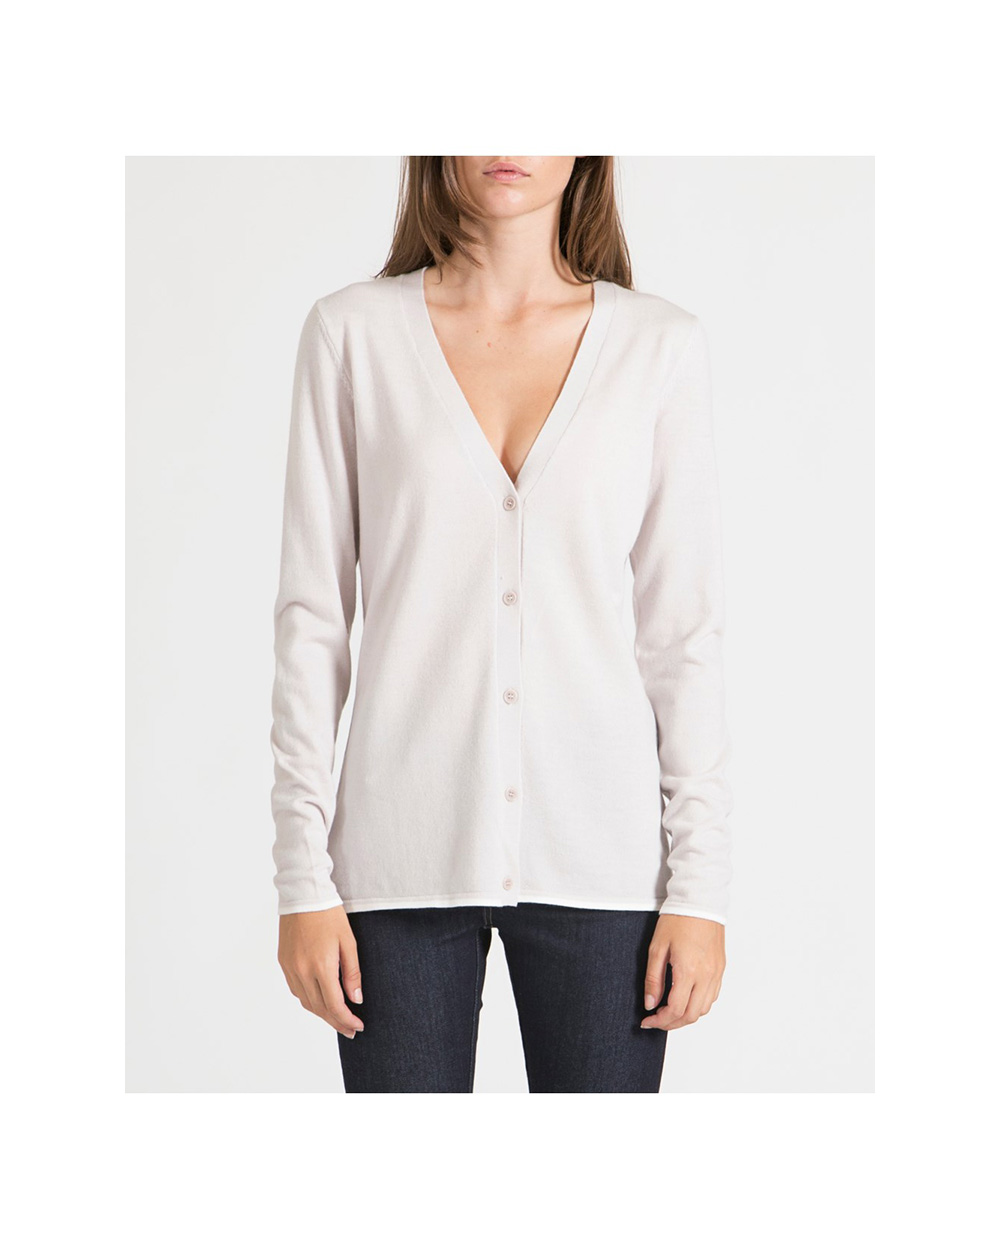 Cayleigh Classic Cardigan, $249, from Workshop